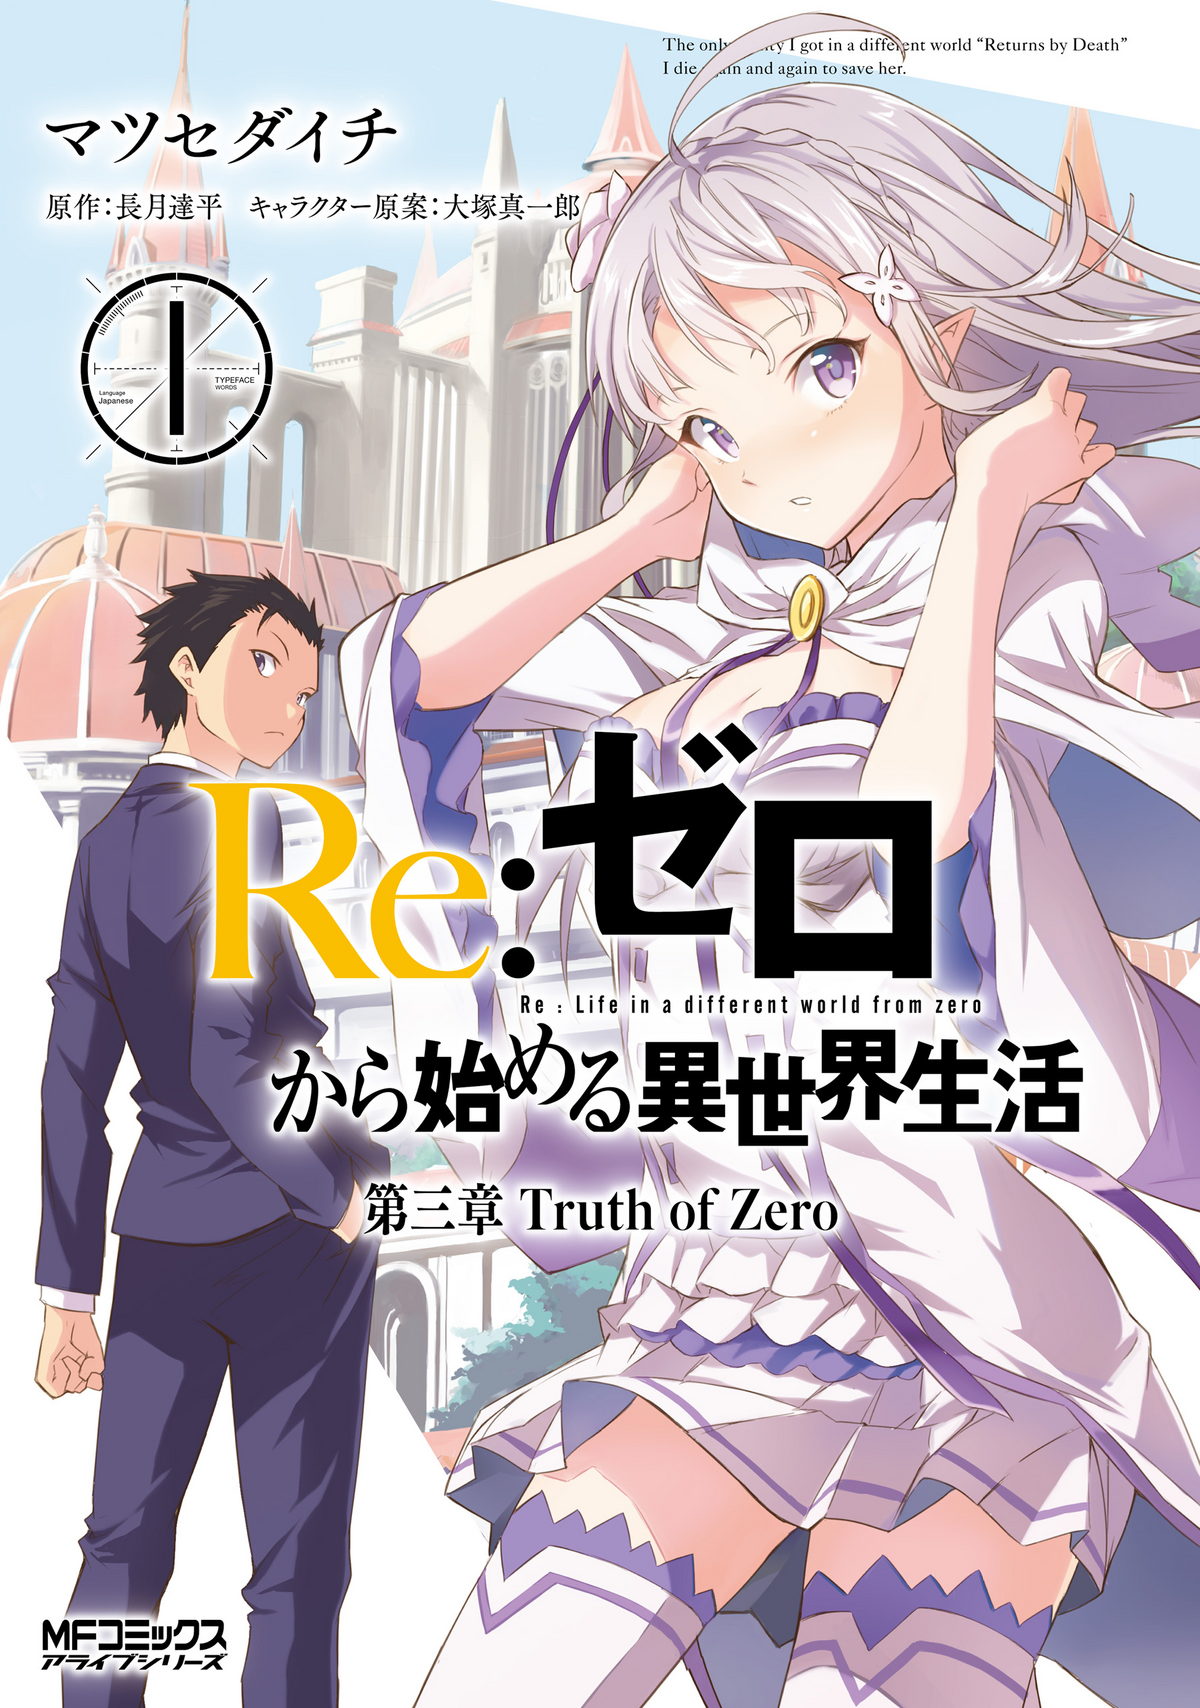 Question about Re:Zero anime and manga. Is the manga further than